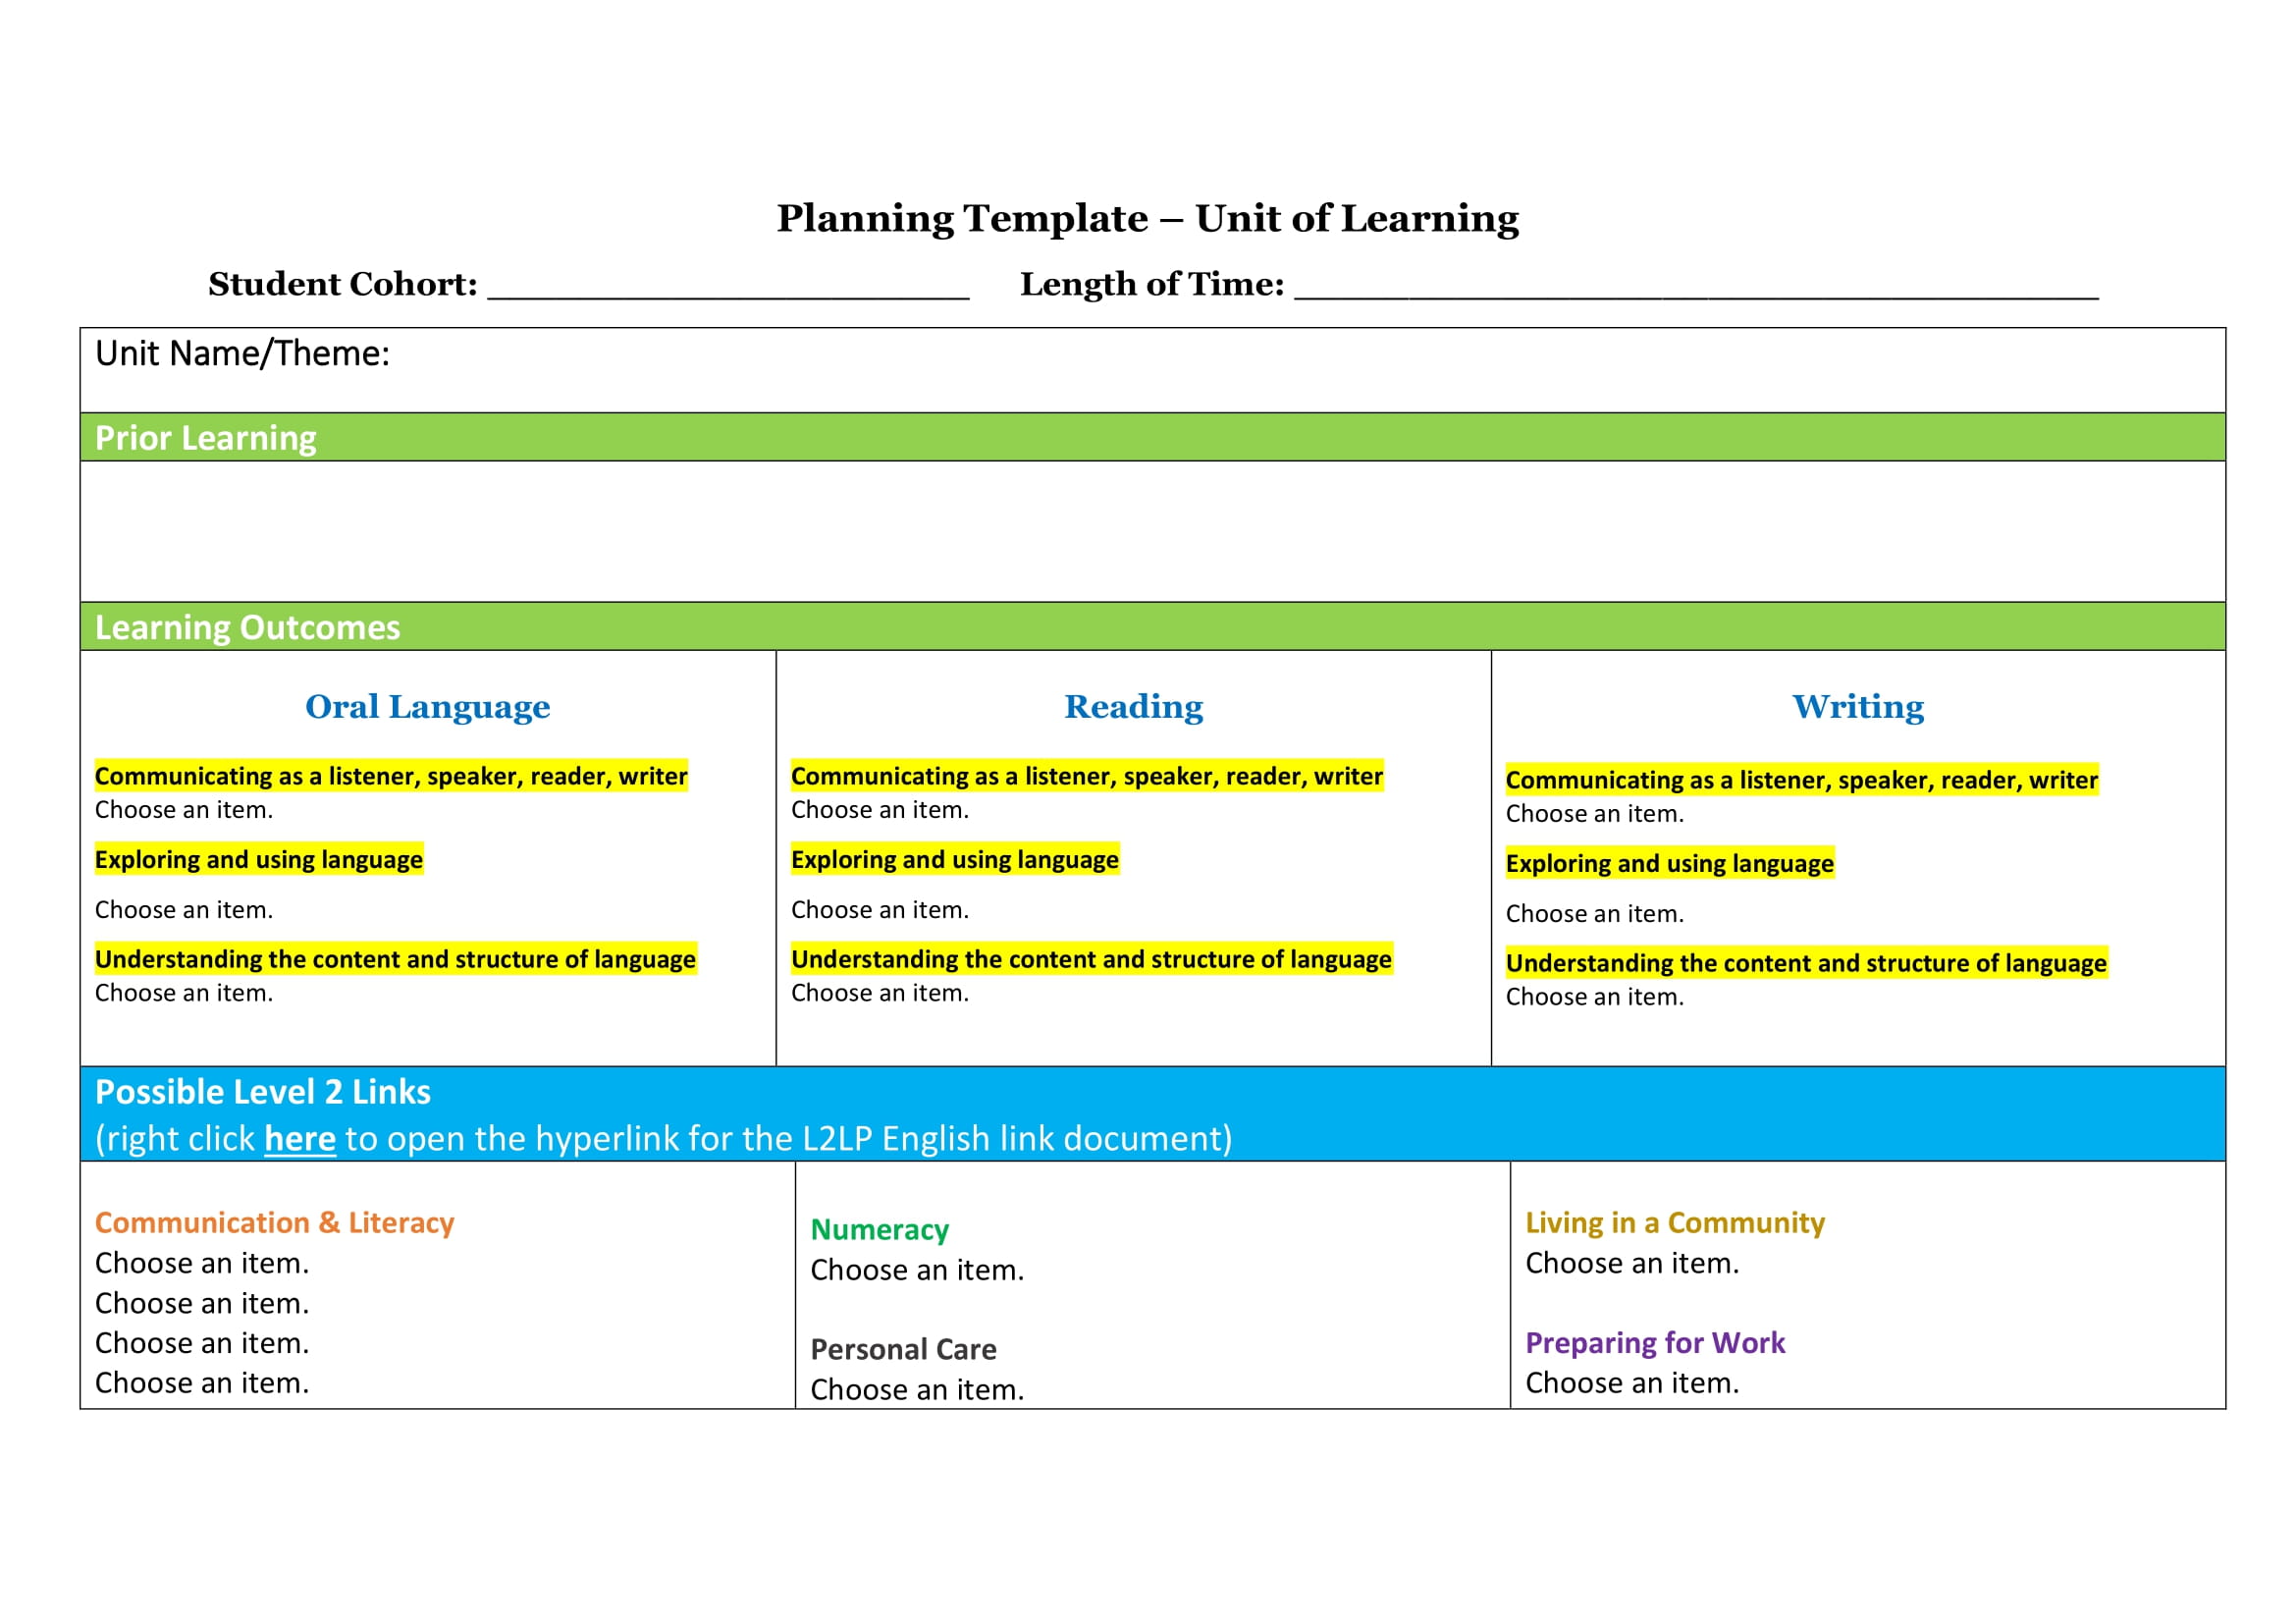 Interactive Planning Template with L2LP Landscape